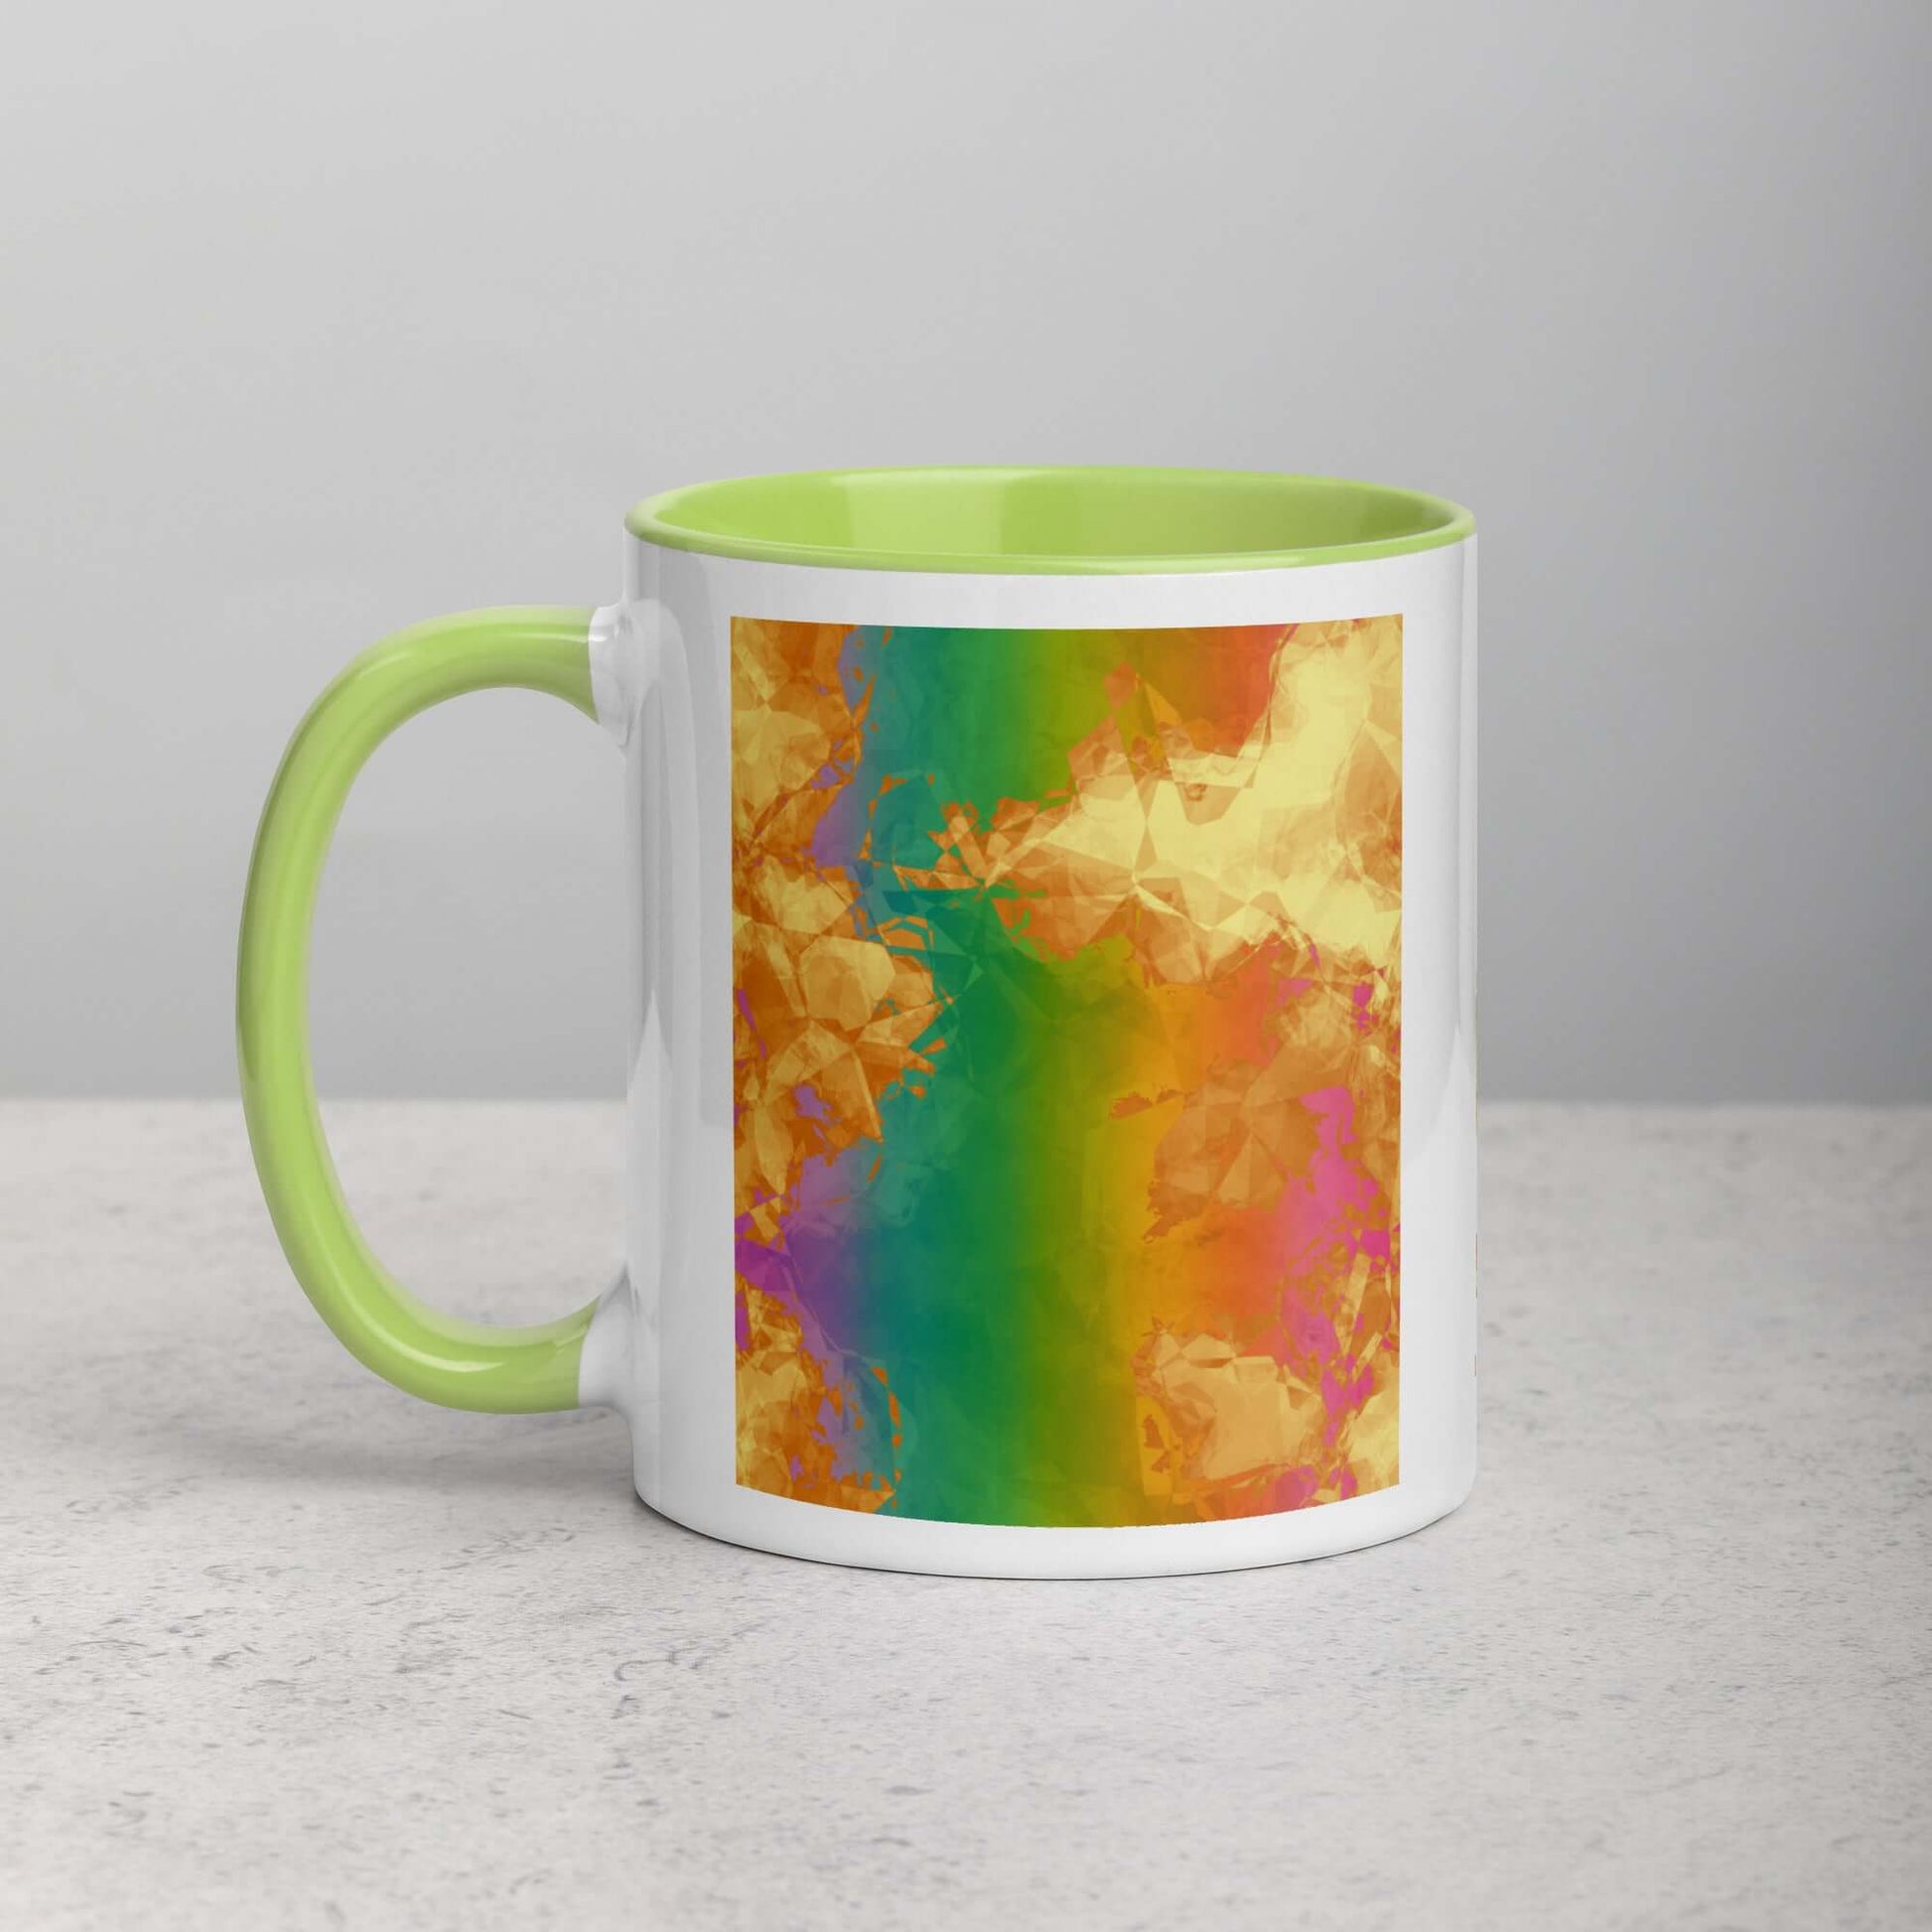 Fiery Rainbow “Rainbow Geode” Abstract Art Mug with Lime Green Color Inside Left Handed Front View